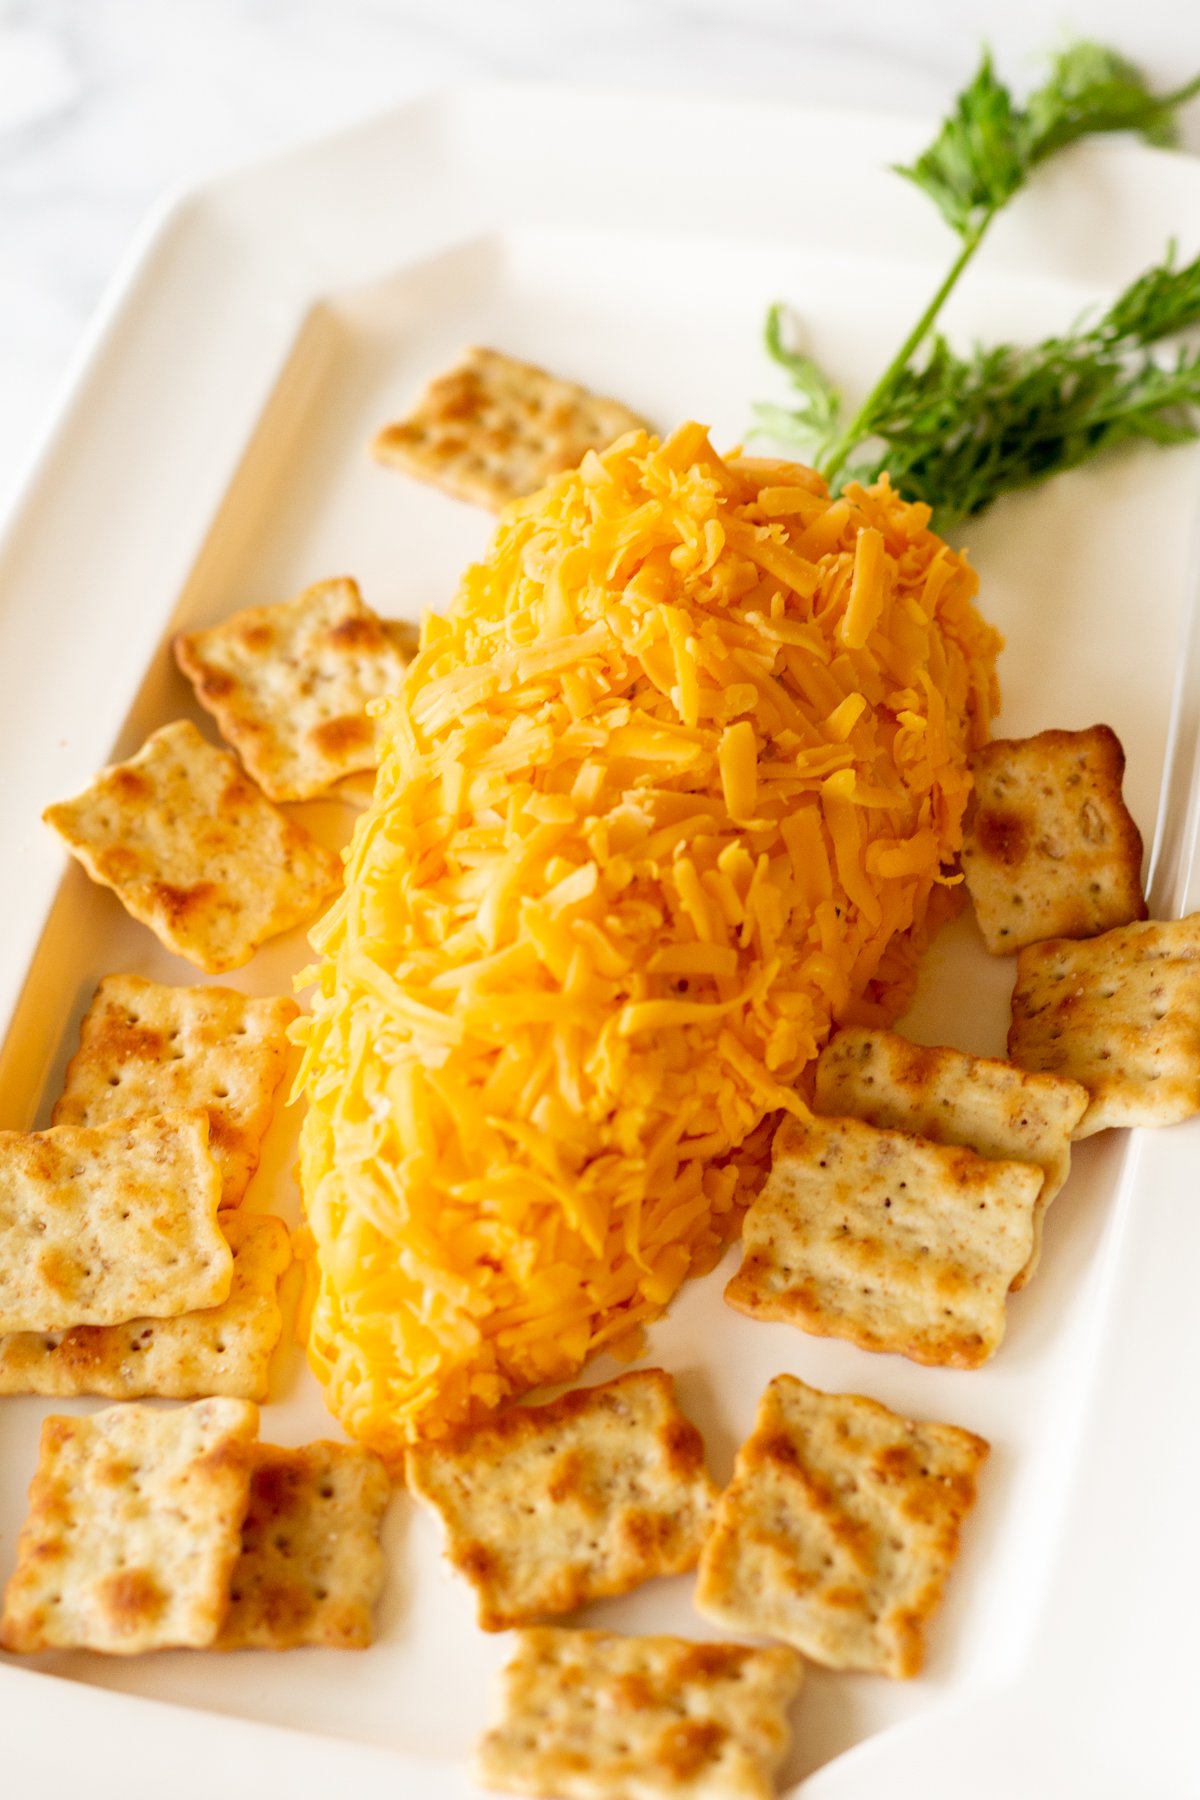 A carrot shaped cheese ball recipe on a plate with crackers.